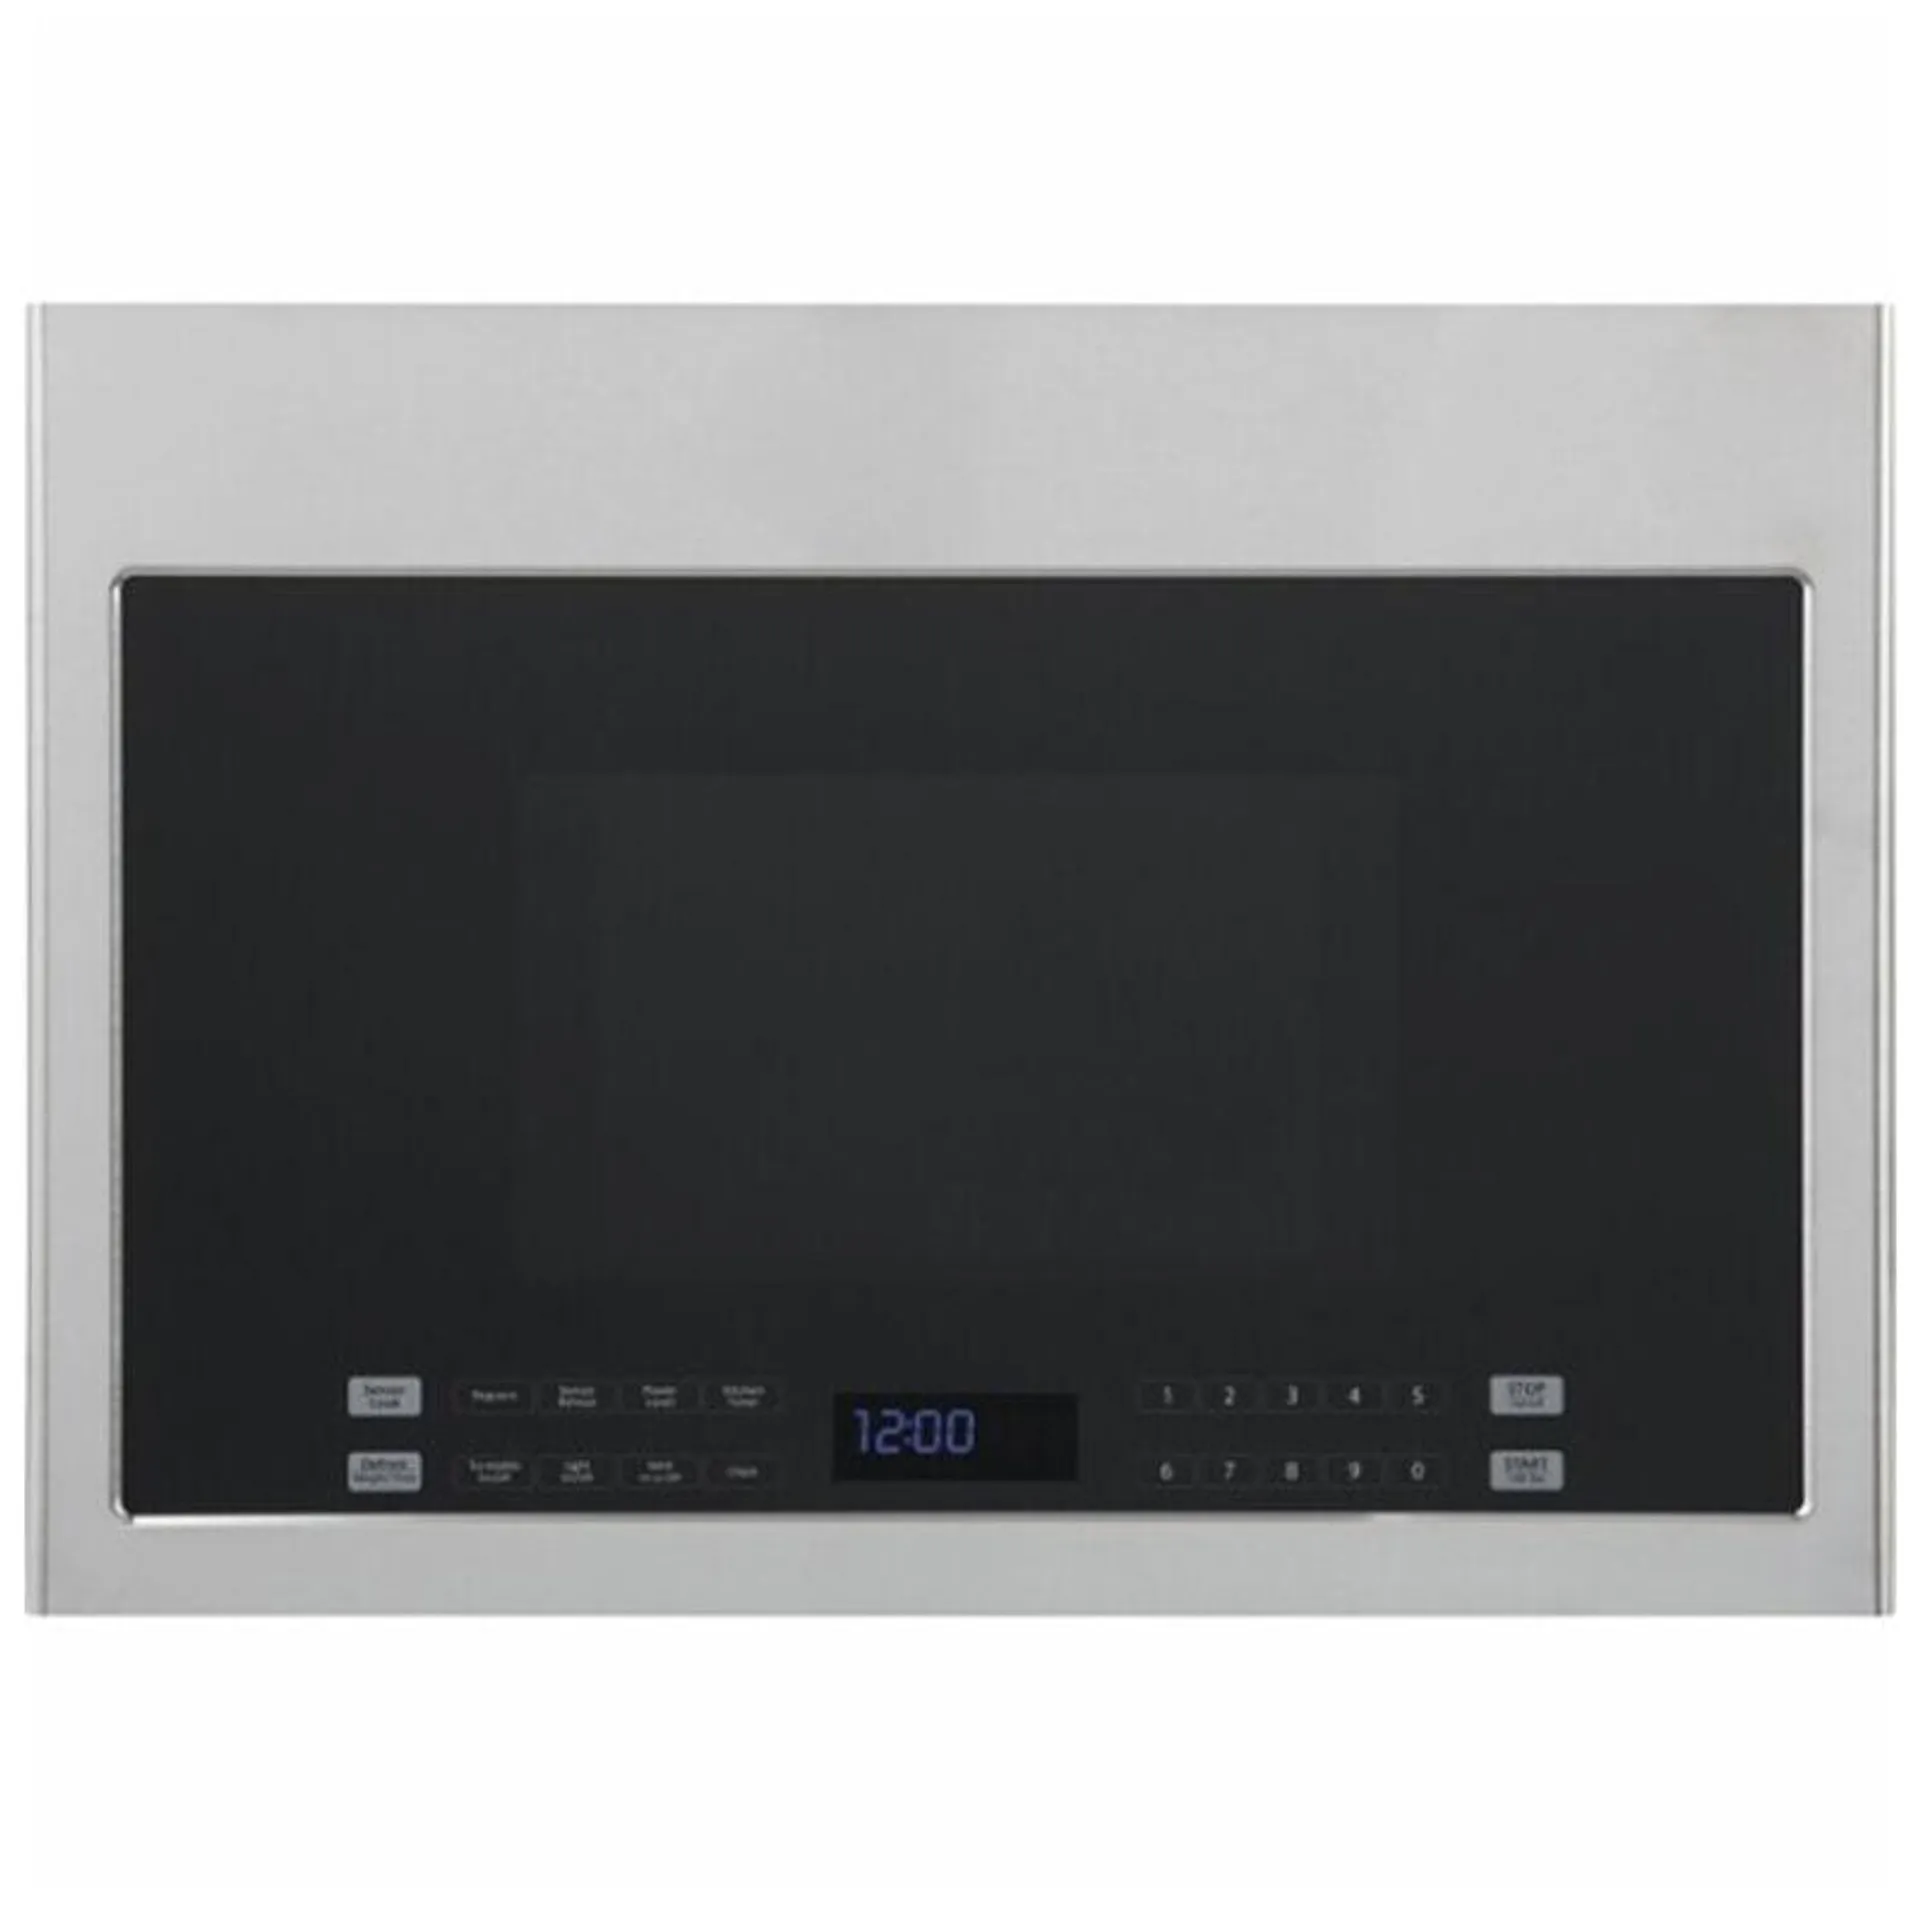 Haier 24" 1.4 Cu. Ft. Over-the-Range Microwave with 10 Power Levels, 300 CFM & Sensor Cooking Controls - Stainless Steel